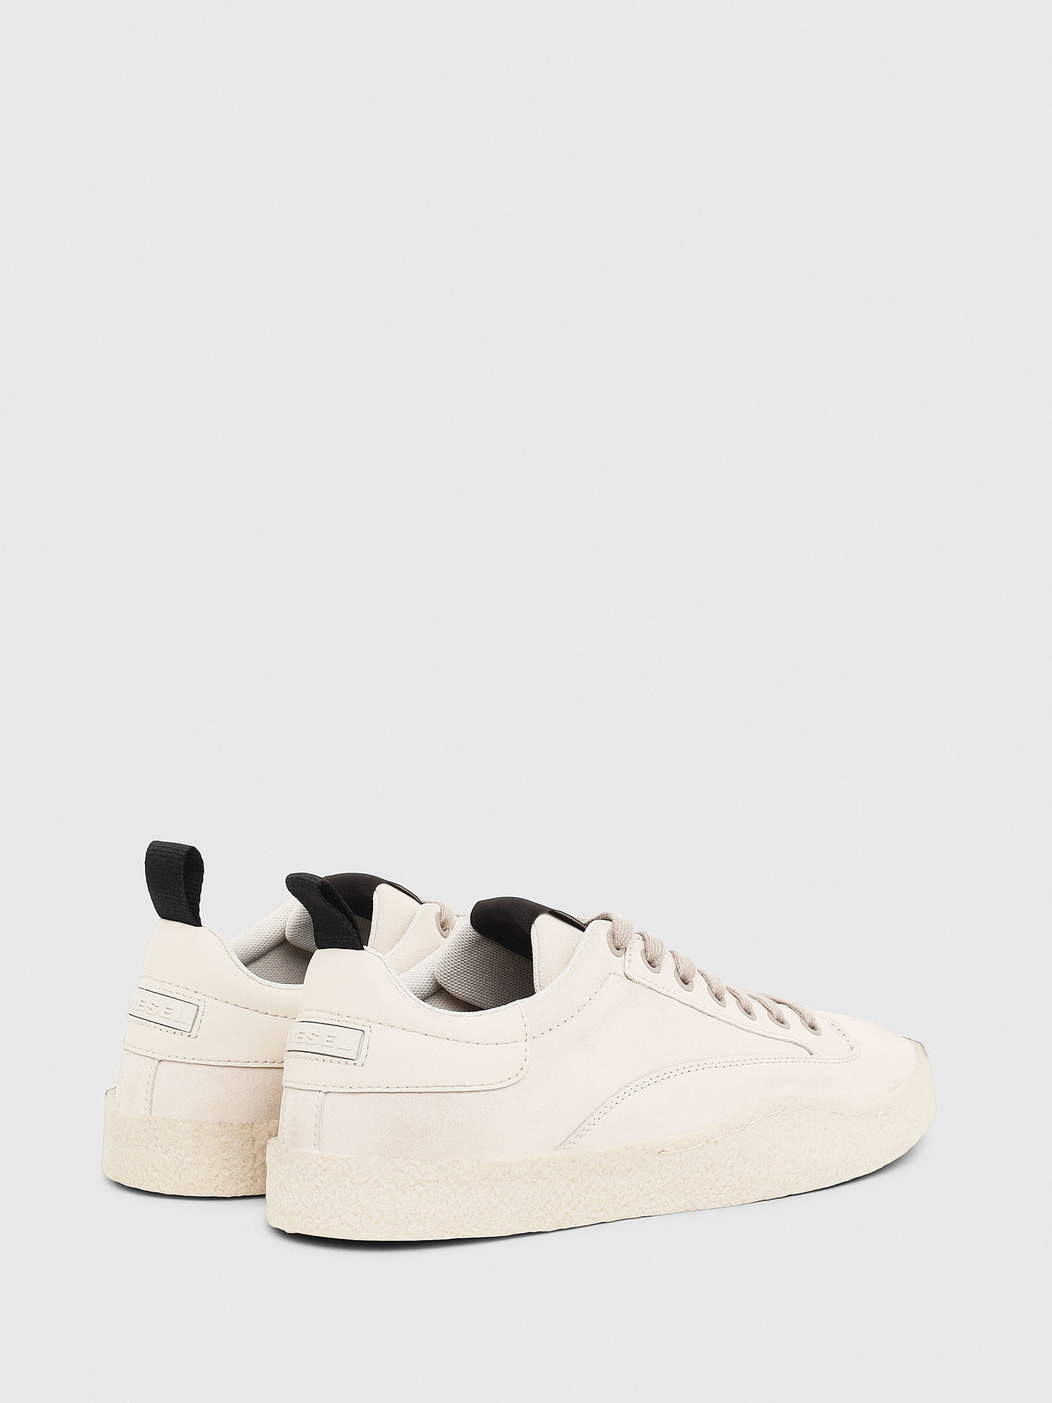 Low-Top Sneakers In Treated Suede